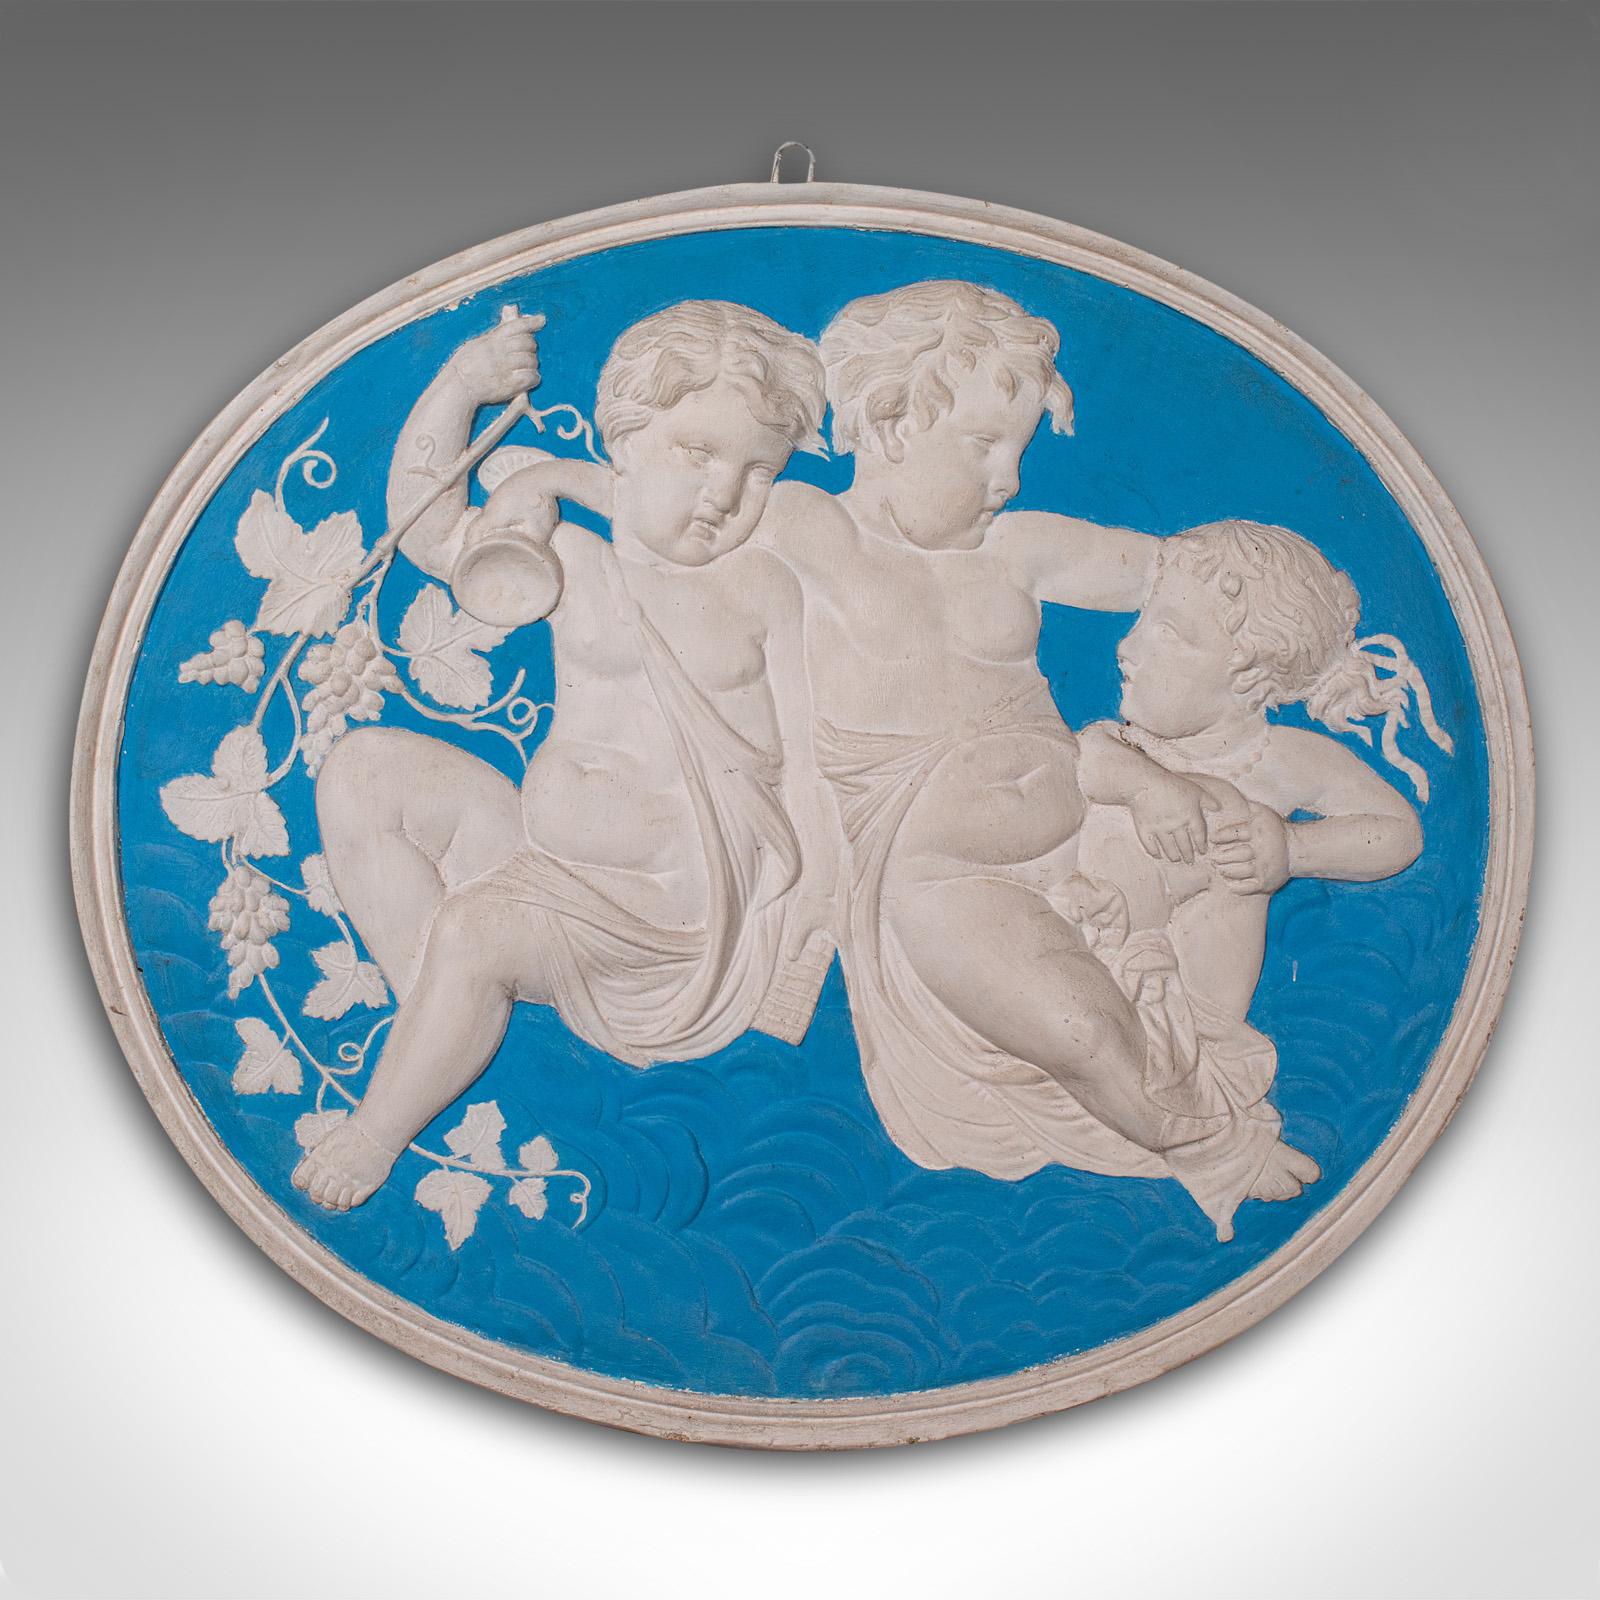 This is a vintage oval relief plaque. An English, reconstituted stone decorative frieze in the manner of Jasperware, dating to the late 20th century, circa 1980.

Wonderful putto decoration with vibrant colour, ideal for indoors or out
Displaying a